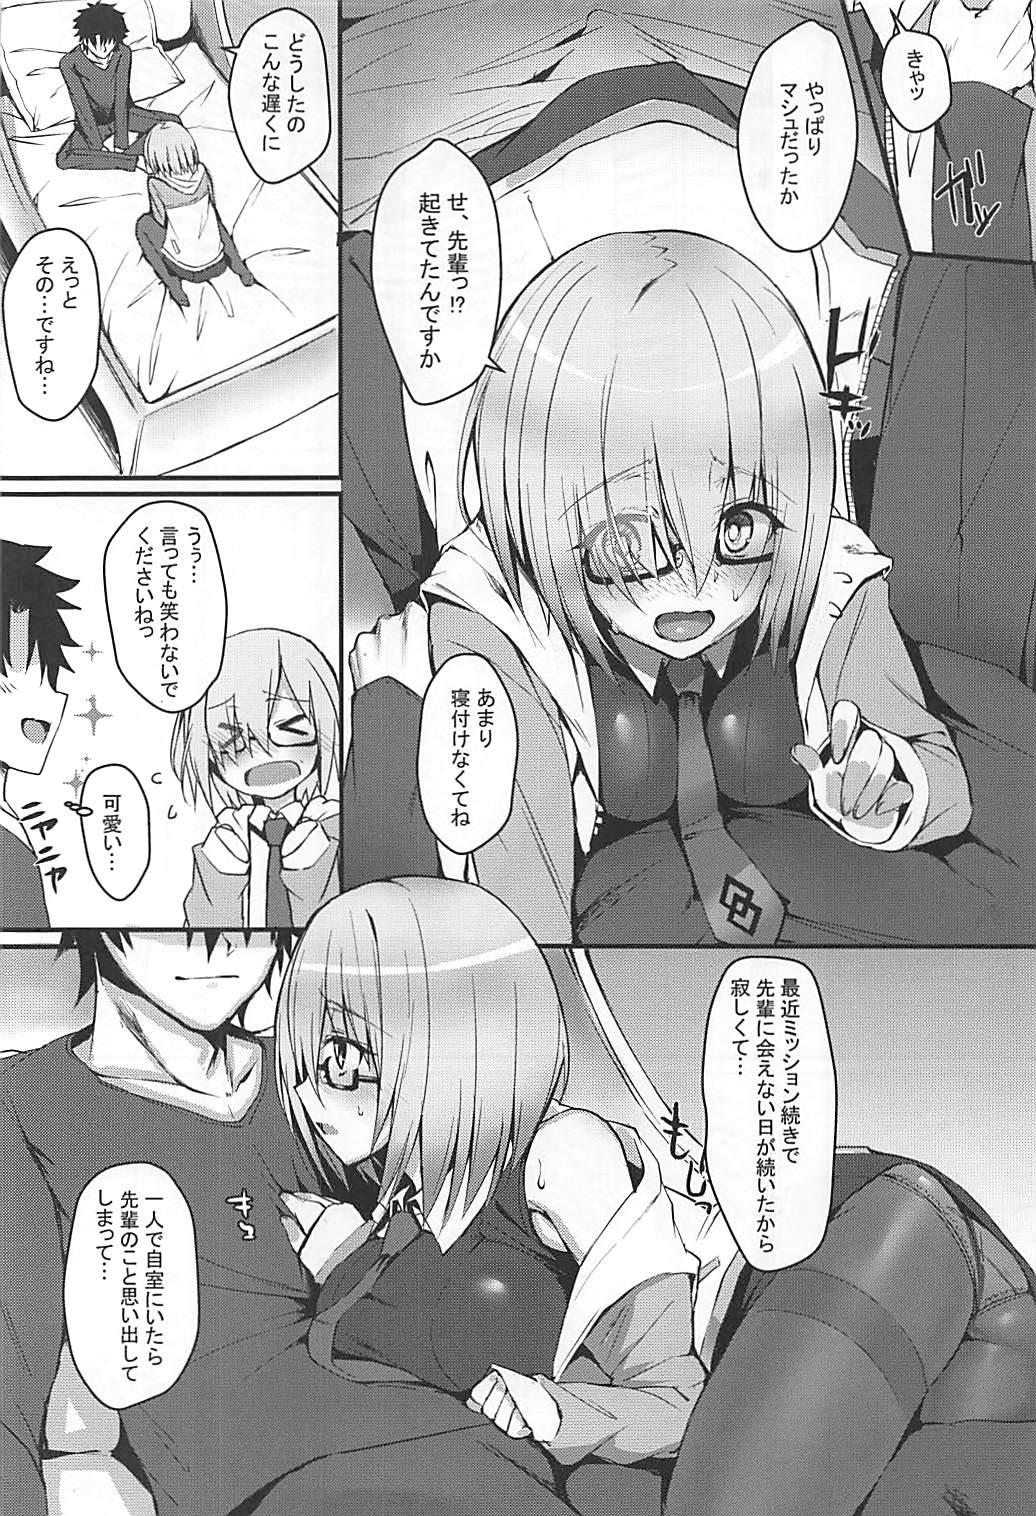 Pmv MDS - Fate grand order Class Room - Page 3